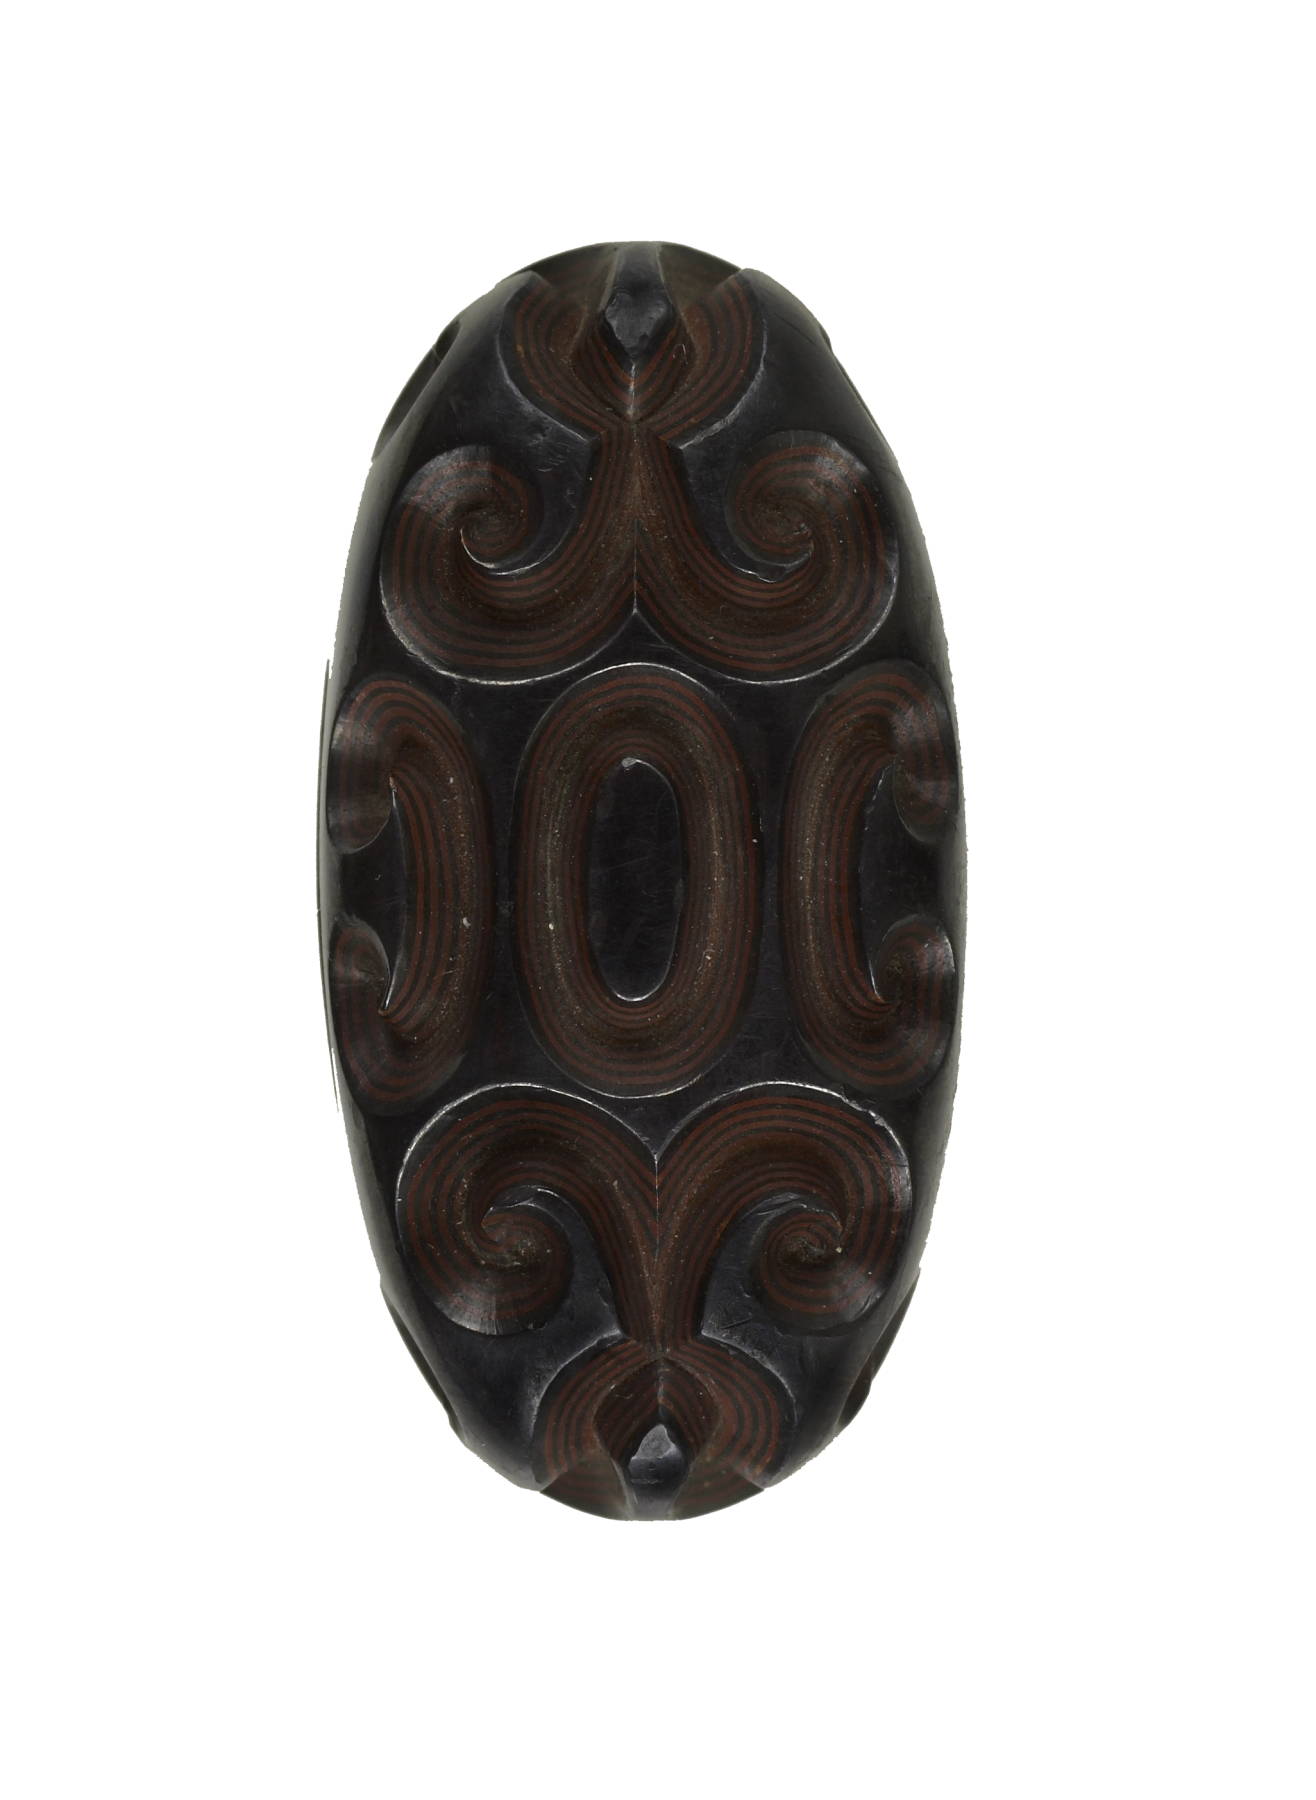 Image for Kashira with Scrollwork Design